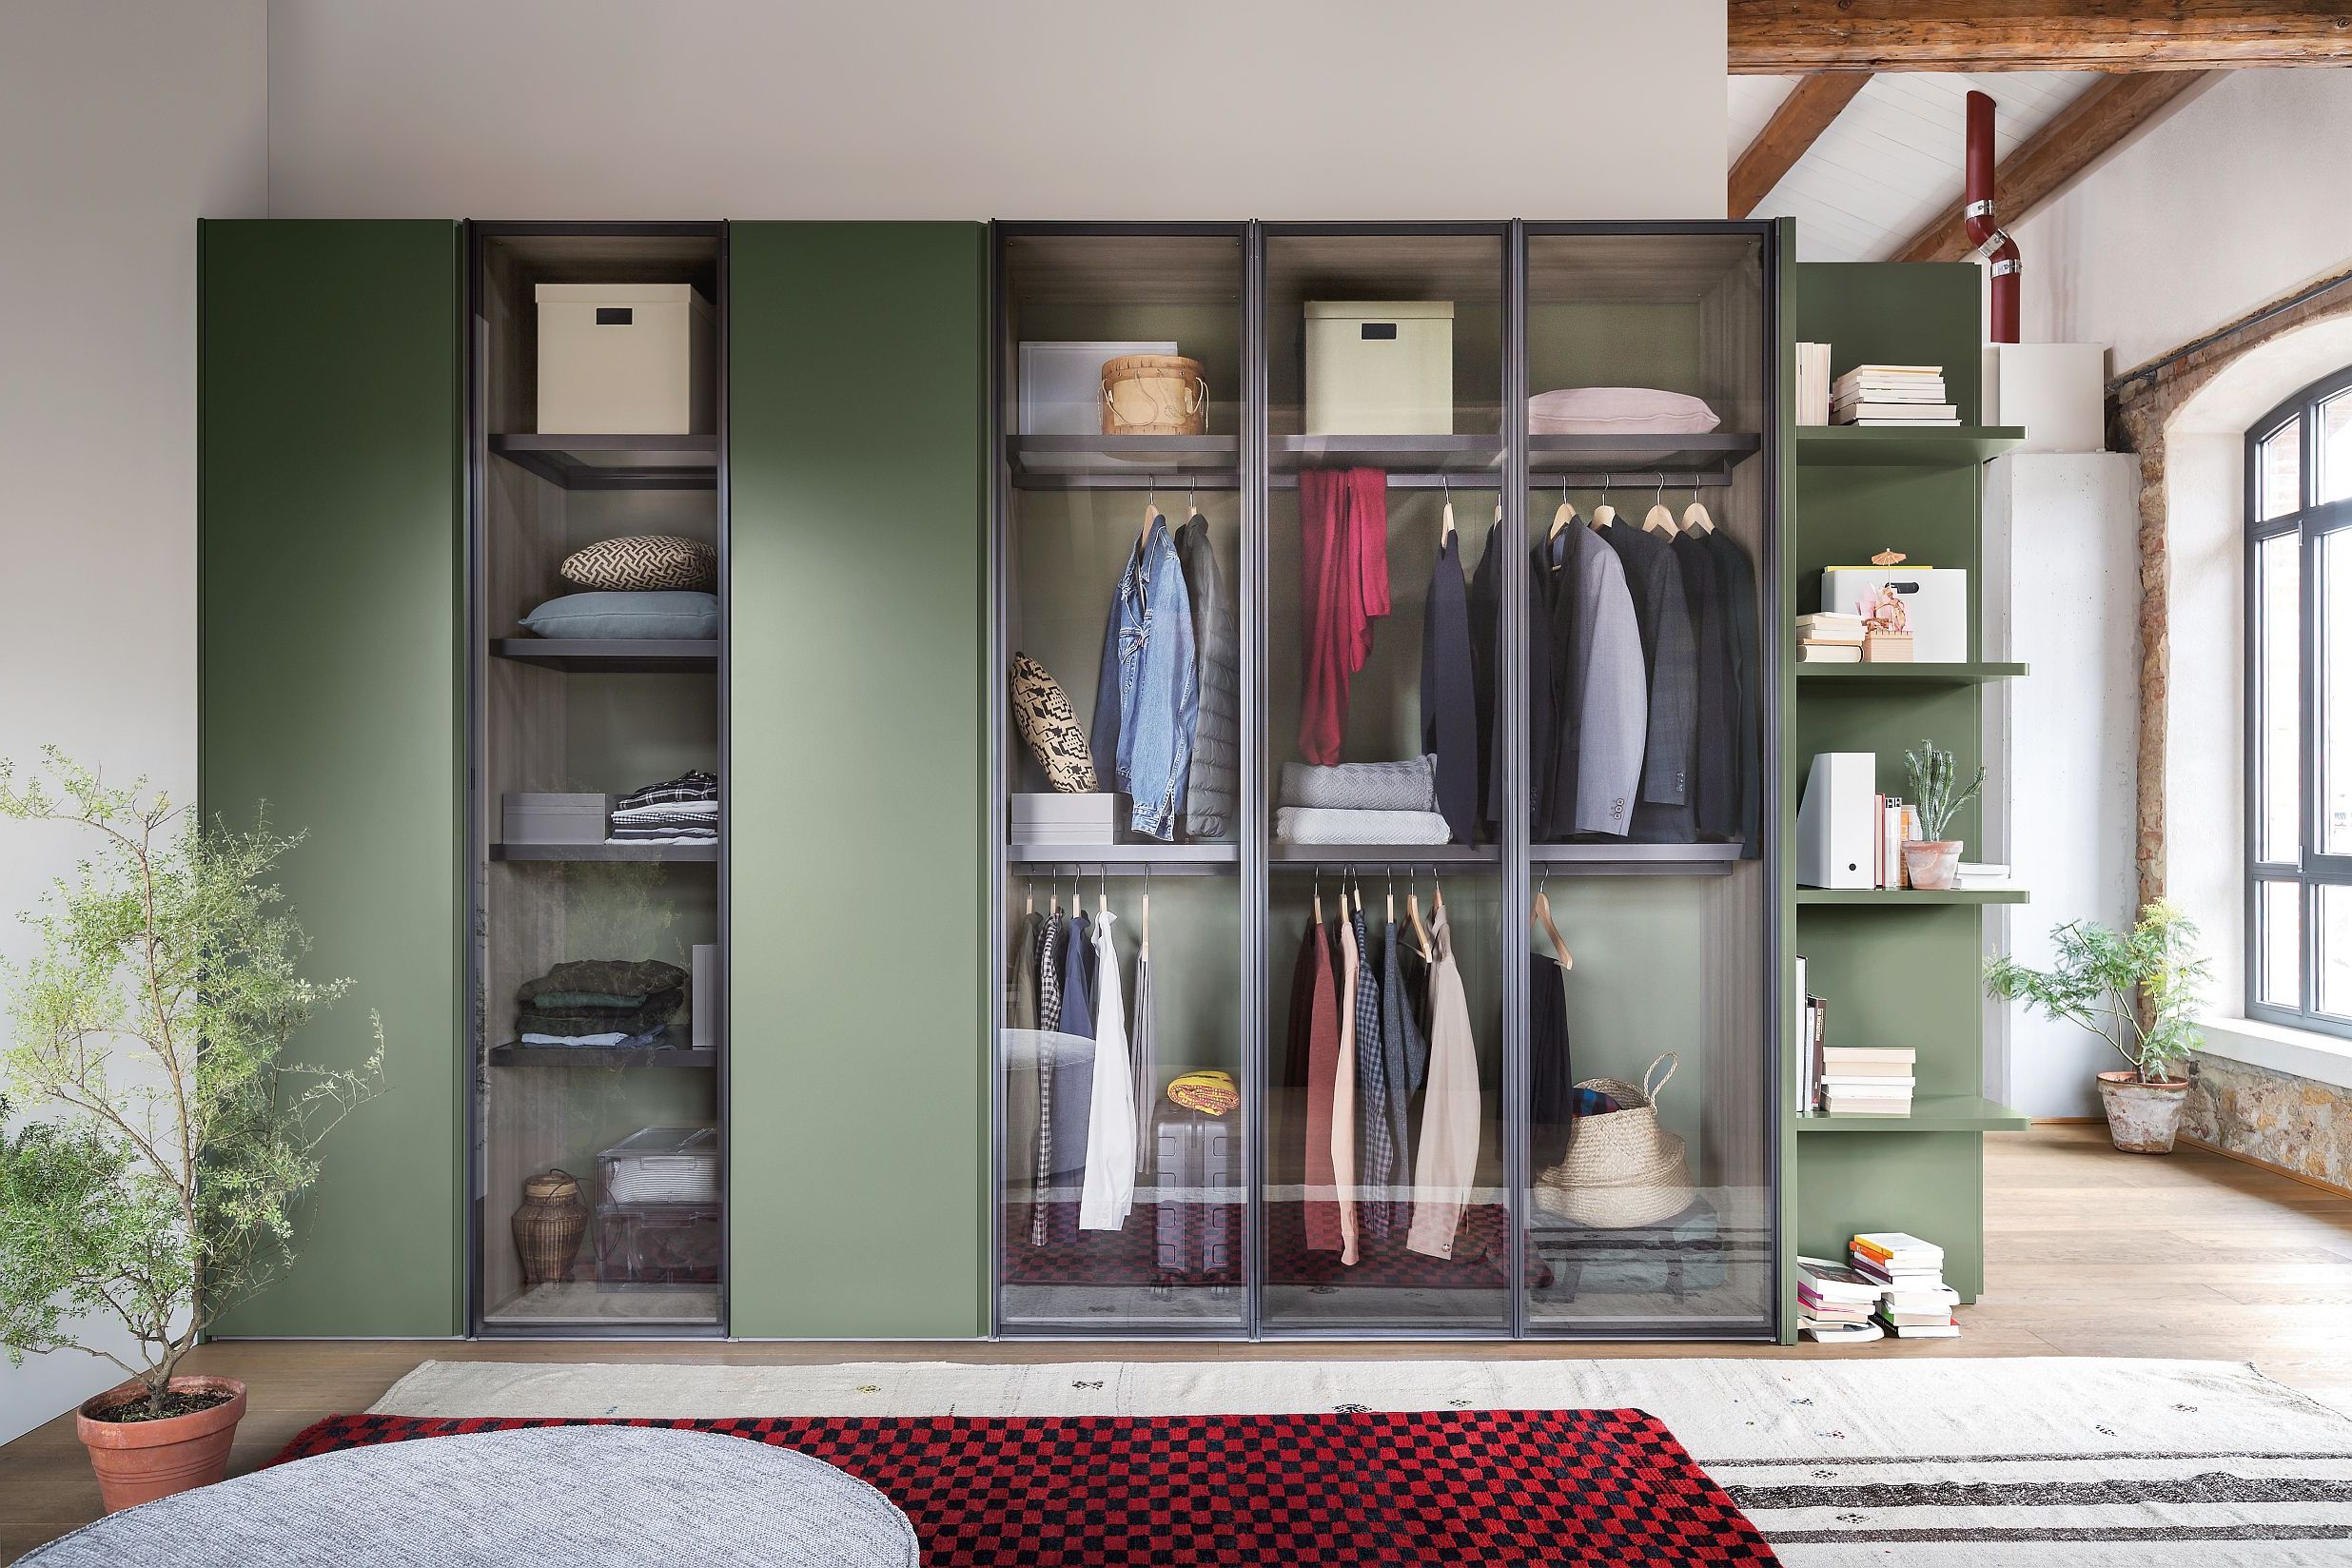 15 Fabulous Built In Wardrobe Ideas For All Interior Styles | Real Homes For Wardrobes With 4 Shelves (View 15 of 20)